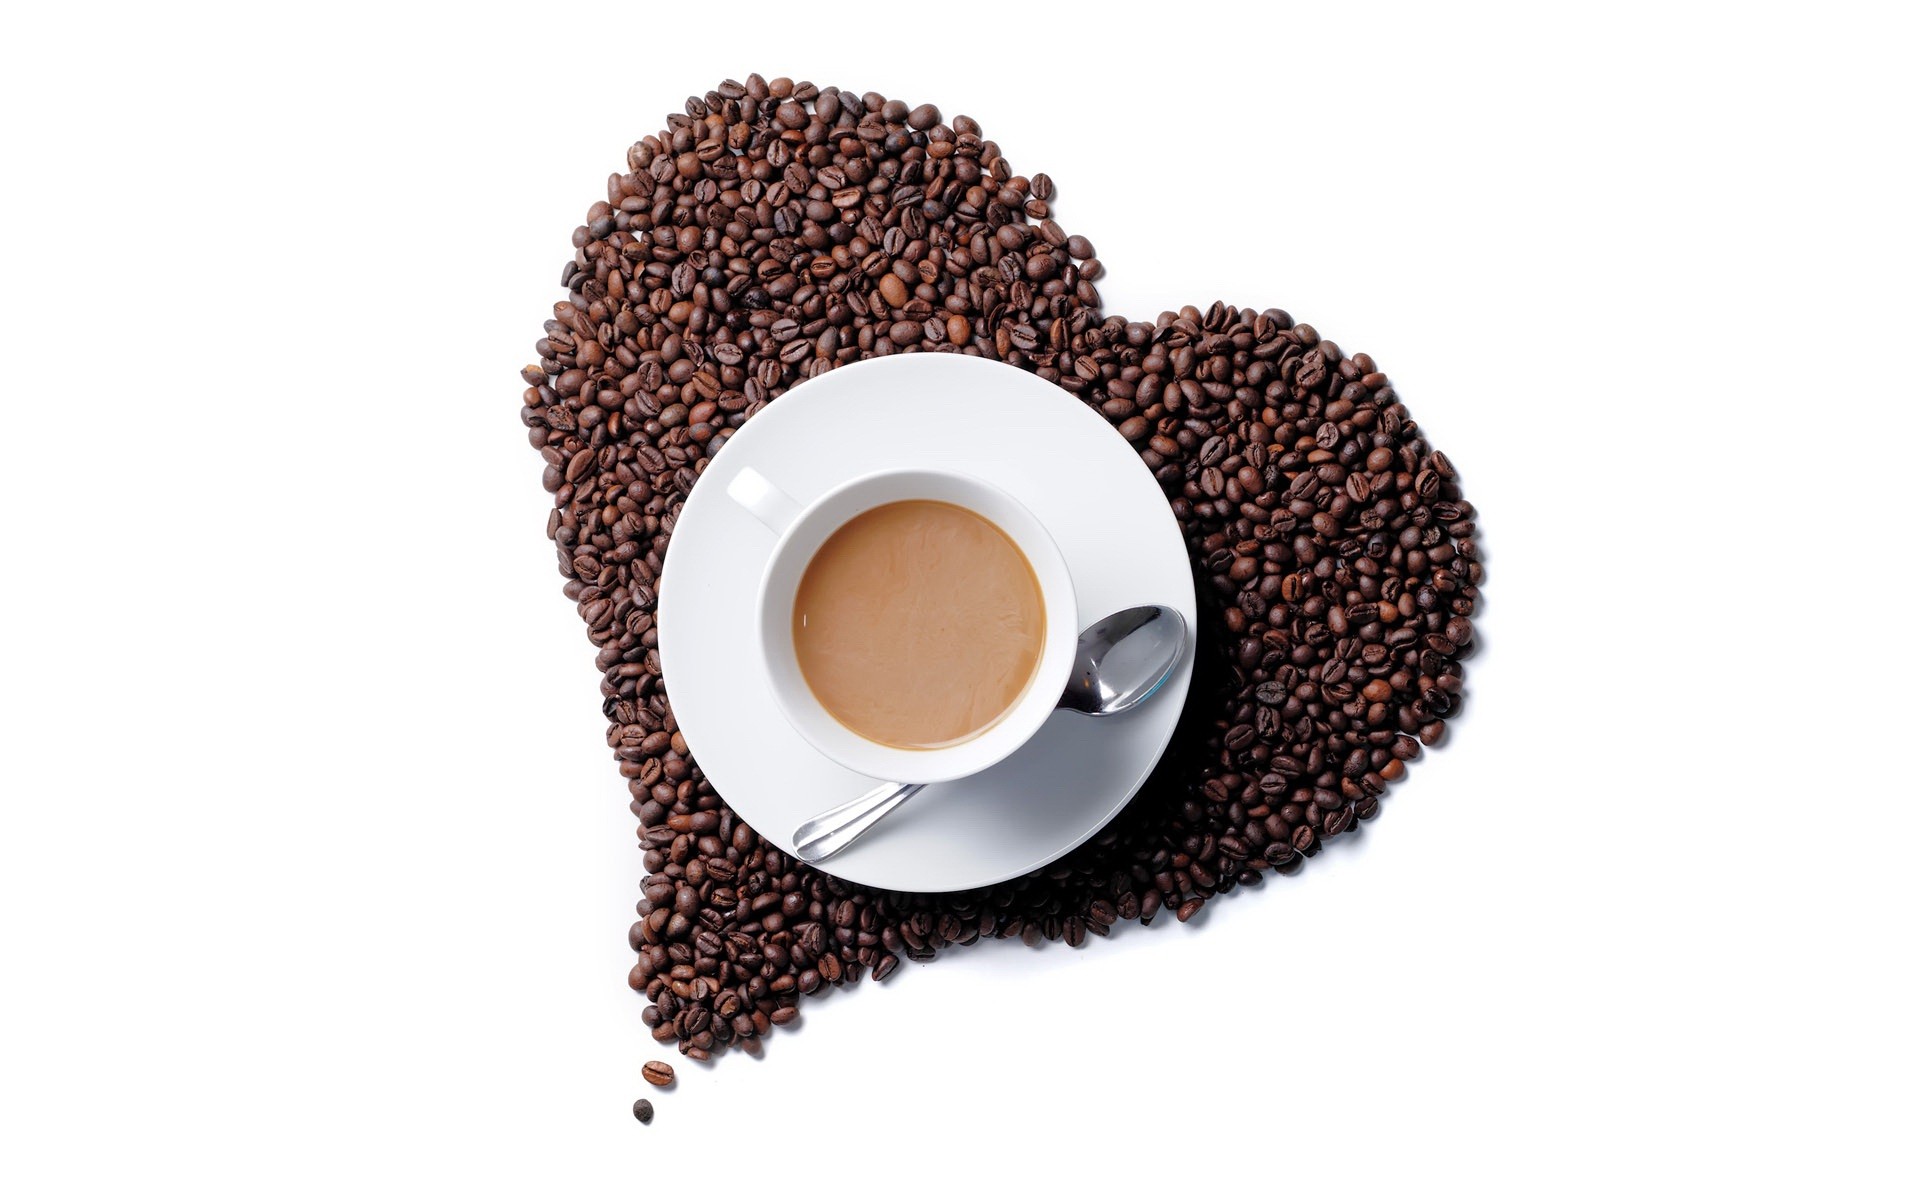 General 1920x1200 coffee cup food heart (design) simple background white background spoon coffee beans